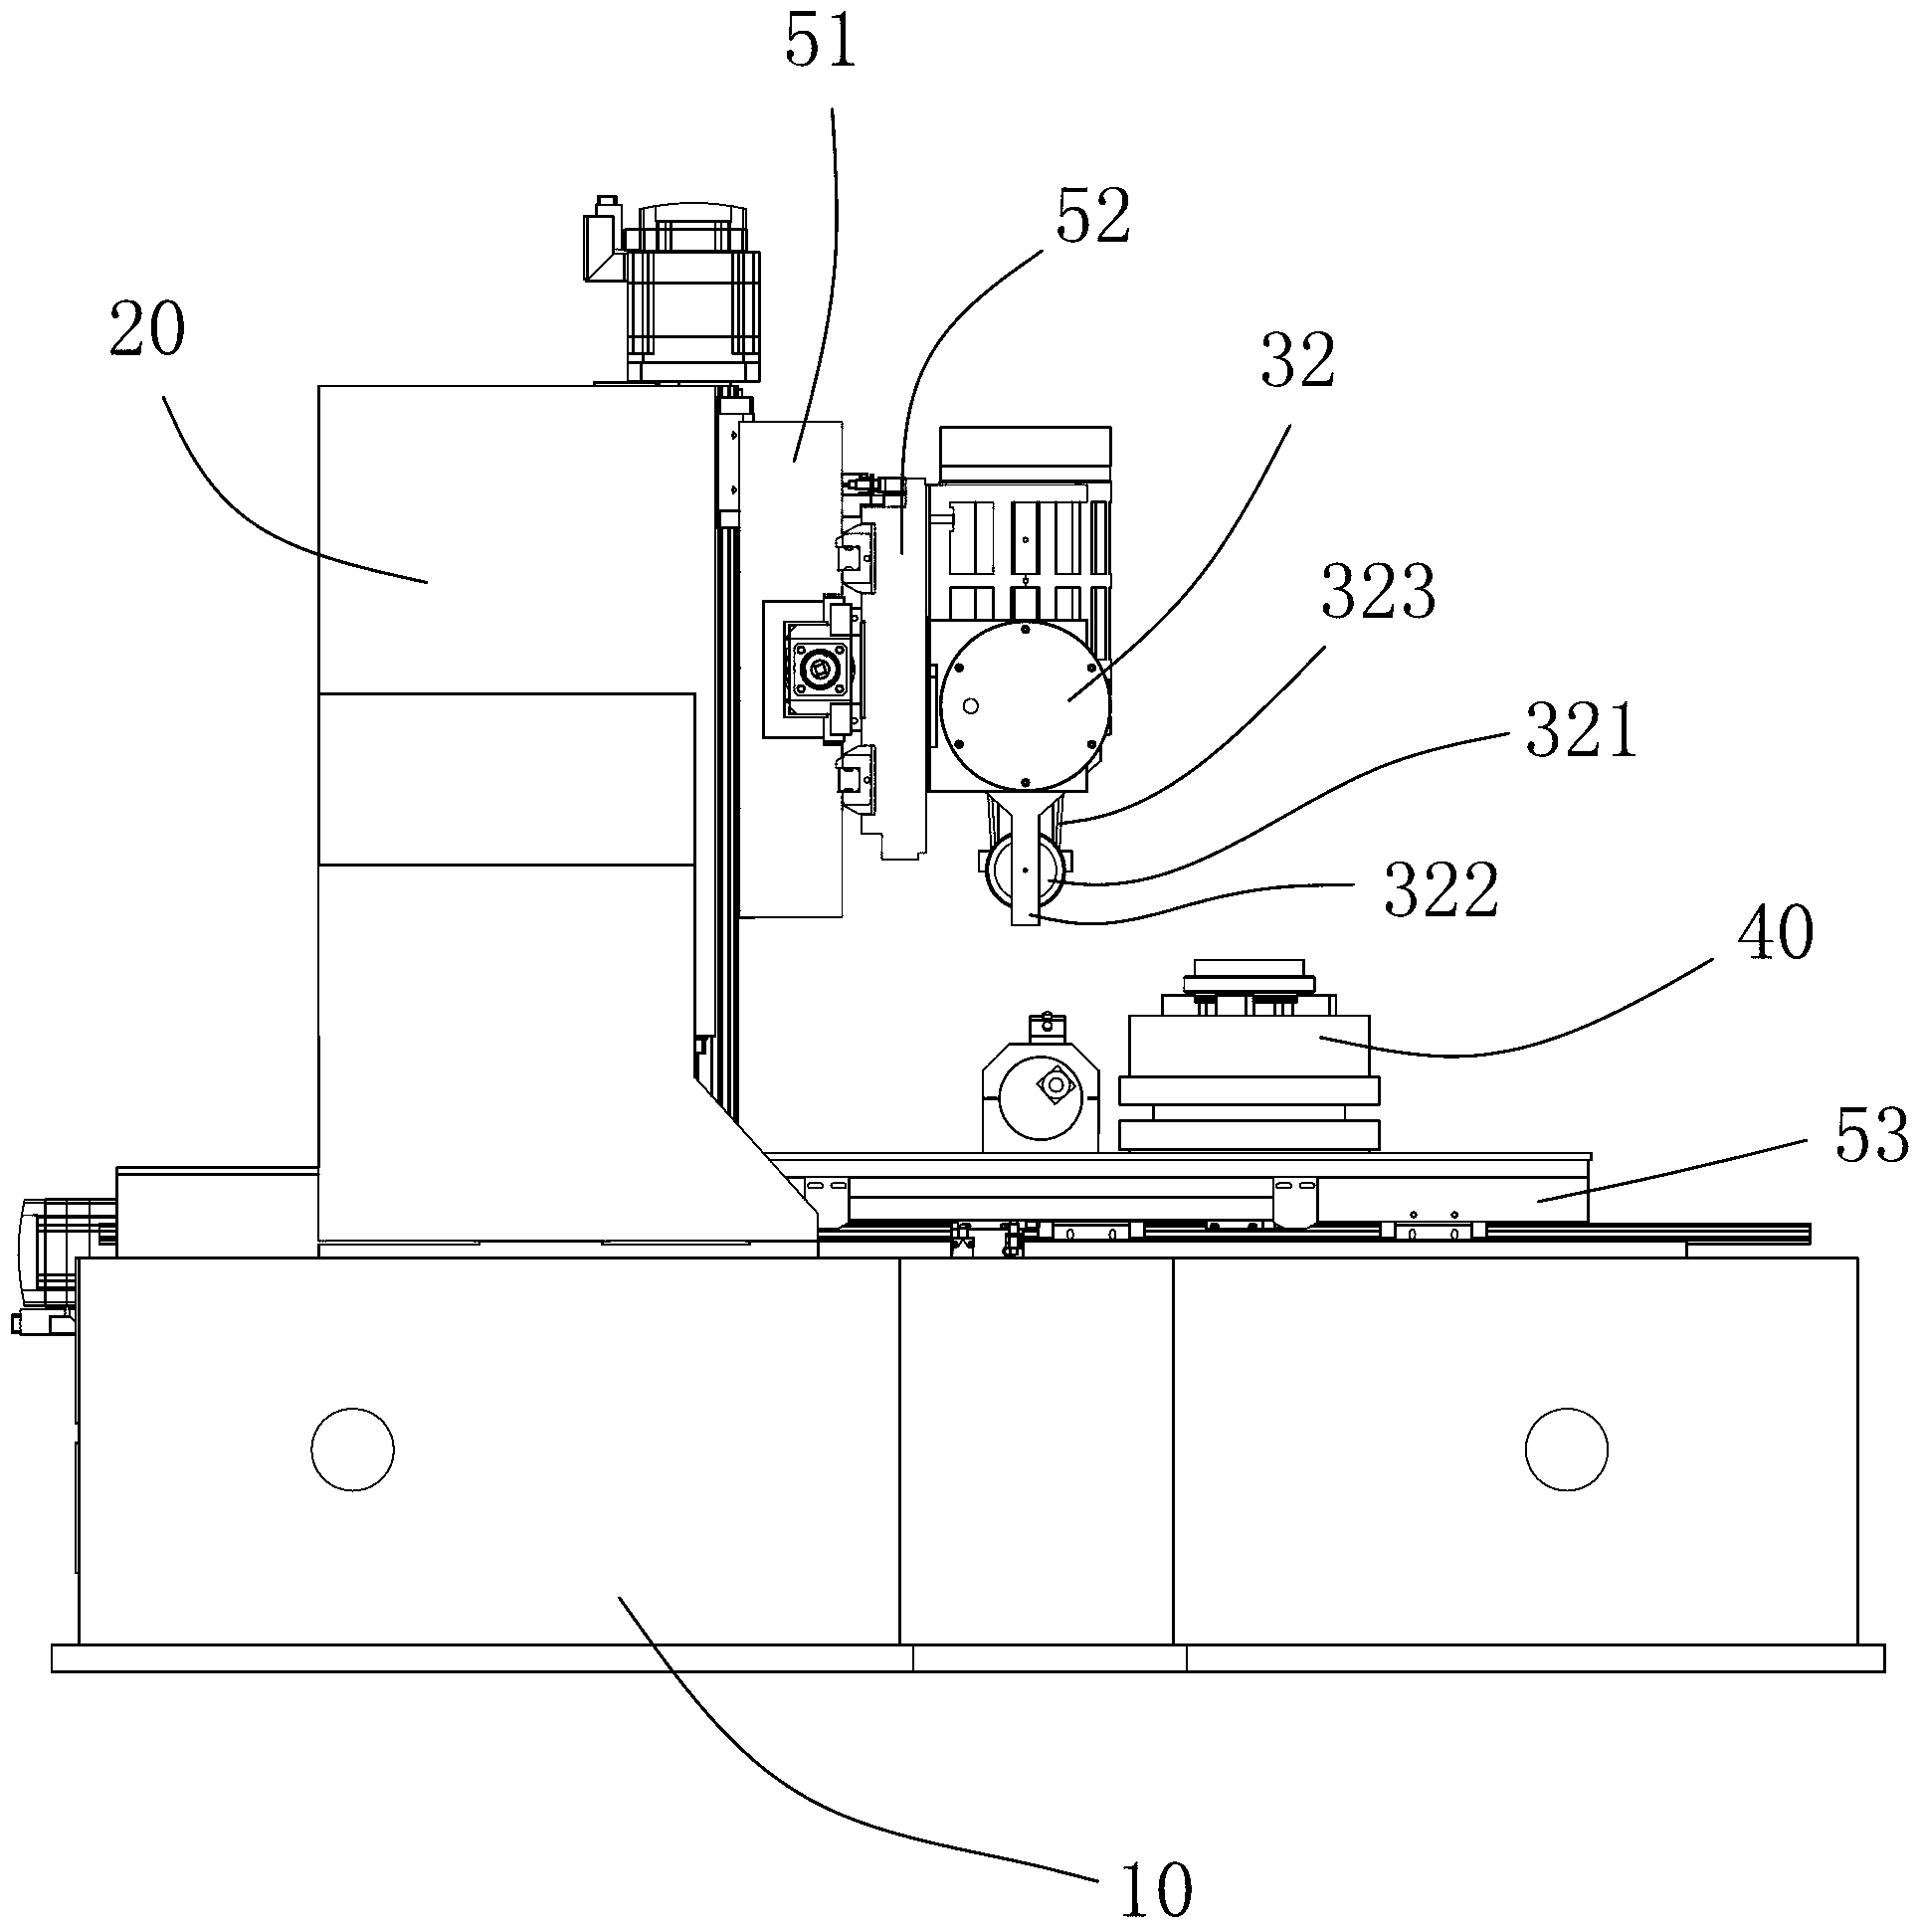 Composite grinding lathe for grinding pin wheel housing